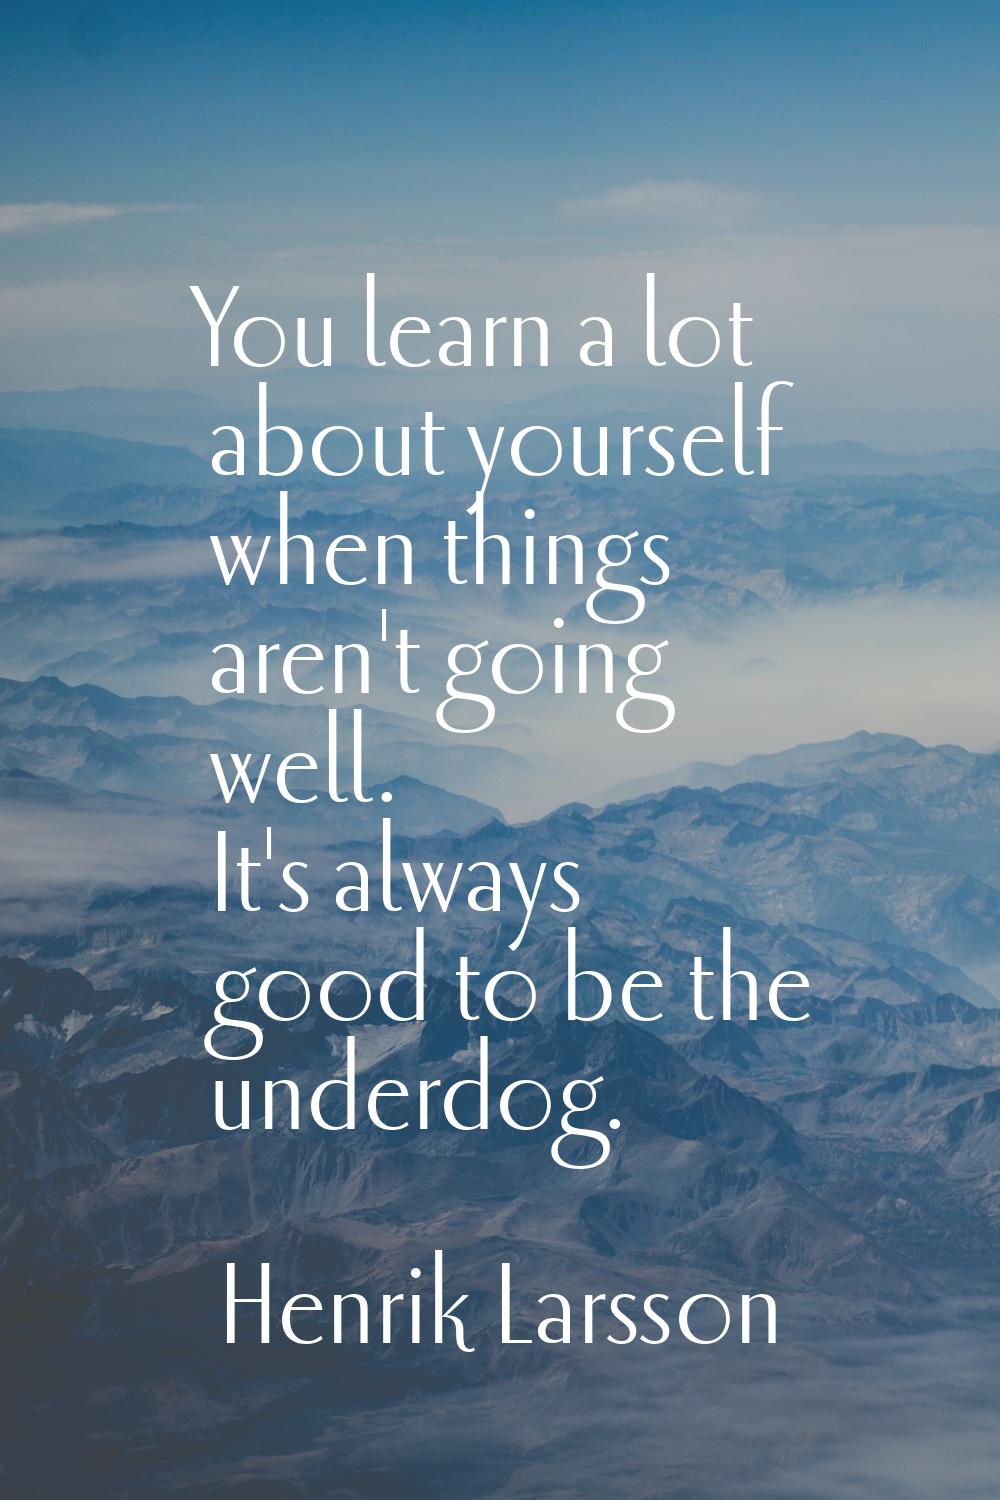 You learn a lot about yourself when things aren't going well. It's always good to be the underdog.